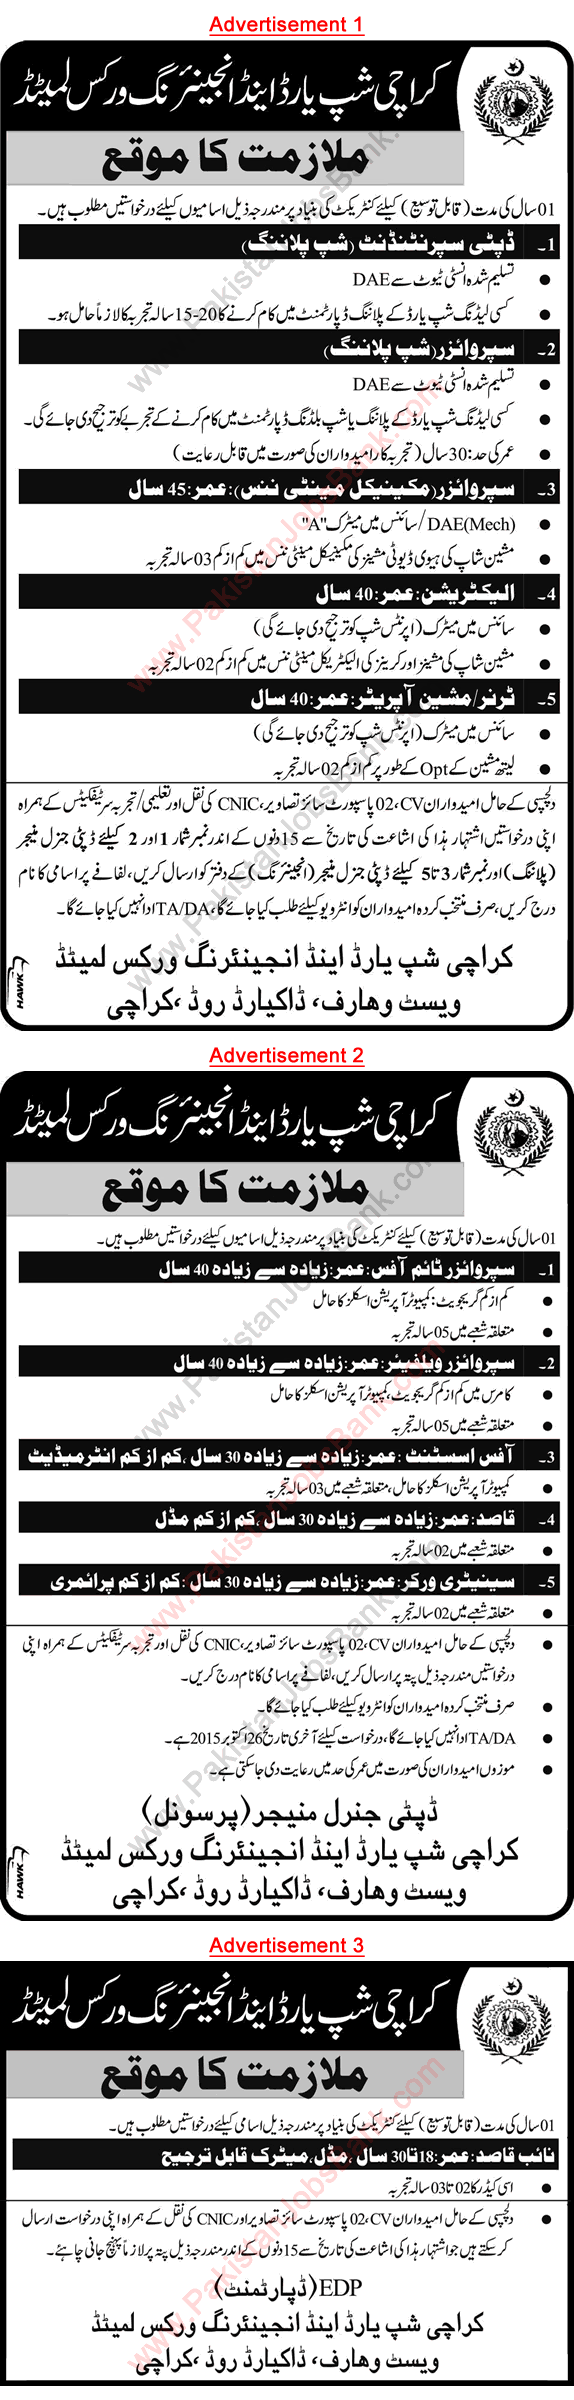 Karachi Shipyard and Engineering Works Jobs 2015 October Engineers, Supervisors, Technicians & Others